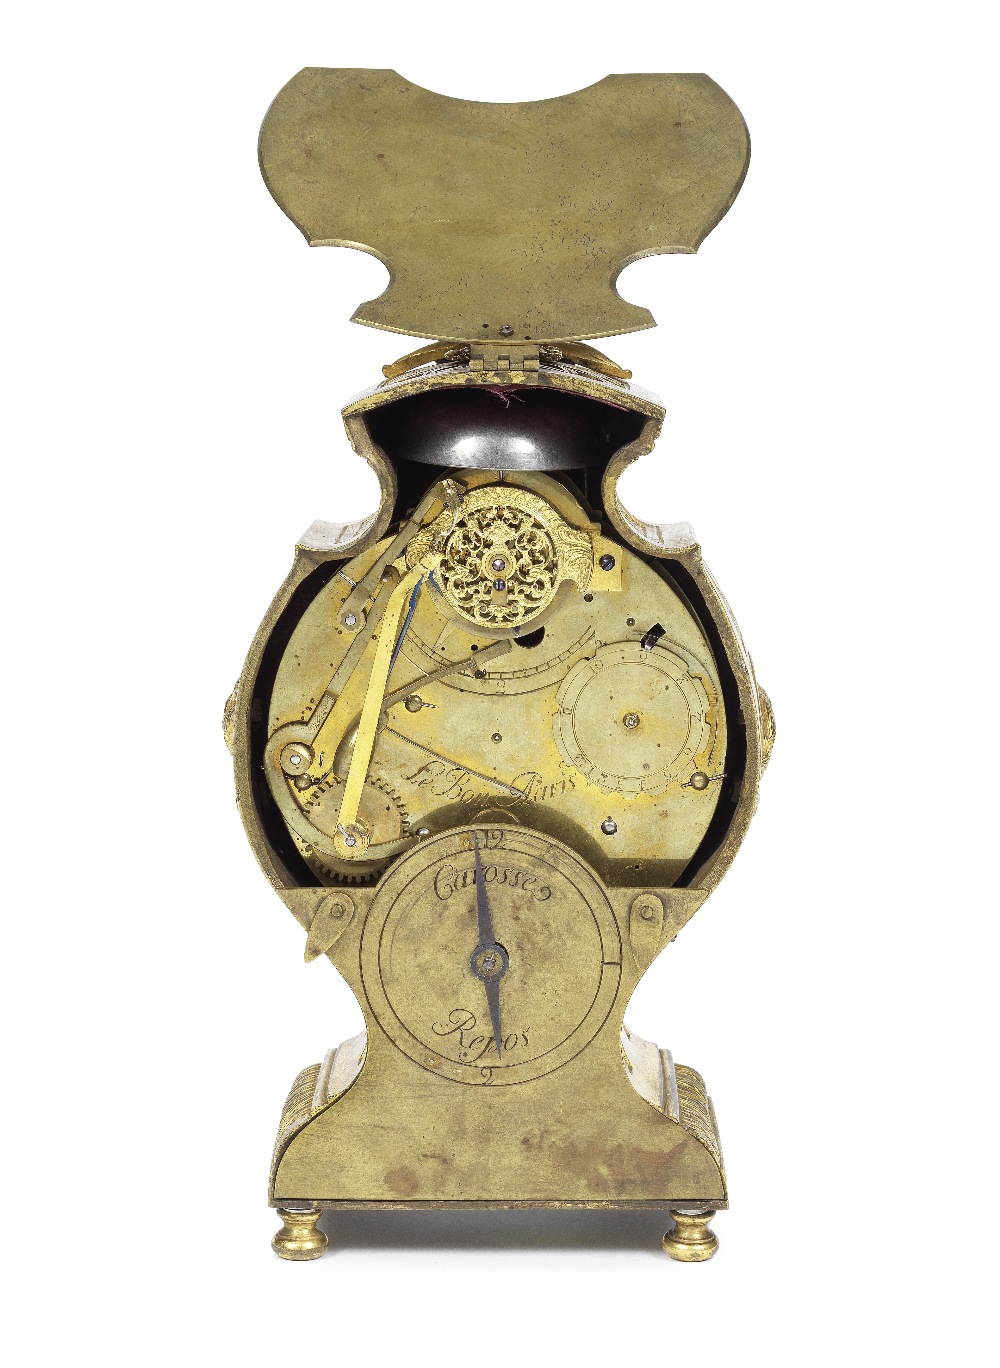 An exceptionally rare and very fine early 18th century French ormolu travelling clock with choice... - Image 2 of 5